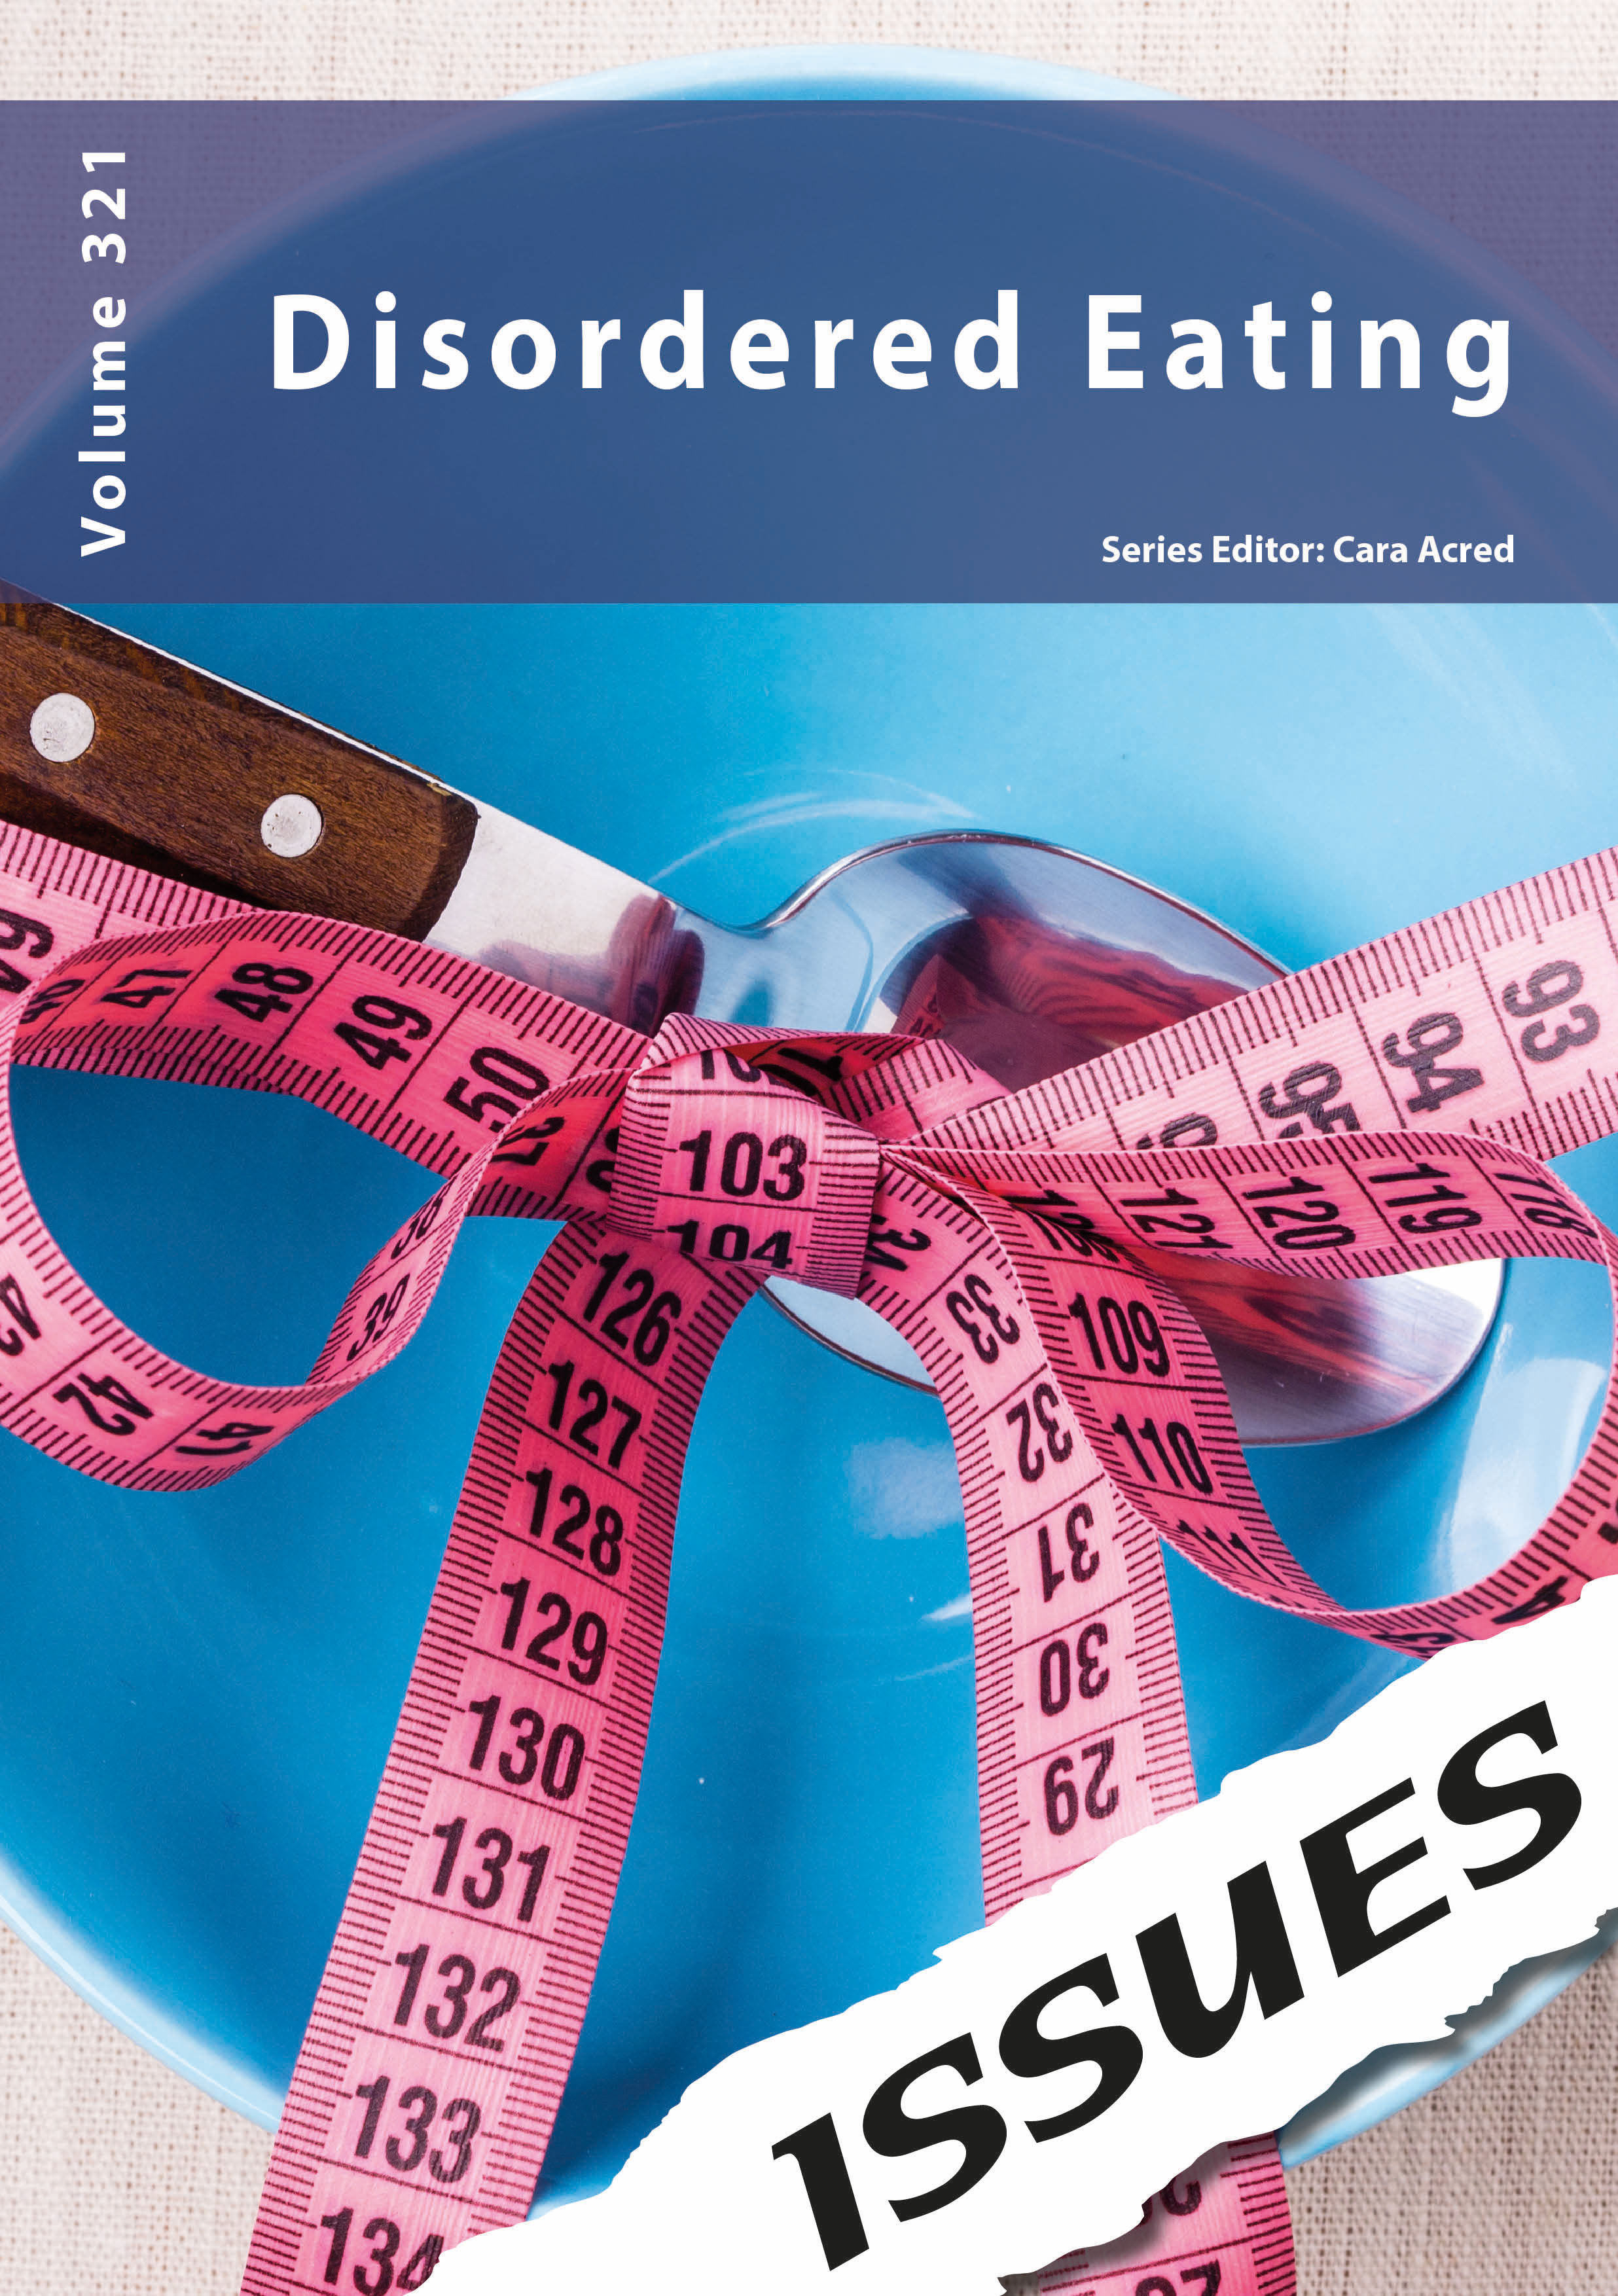 Disordered Eating Independence Educational Publishers